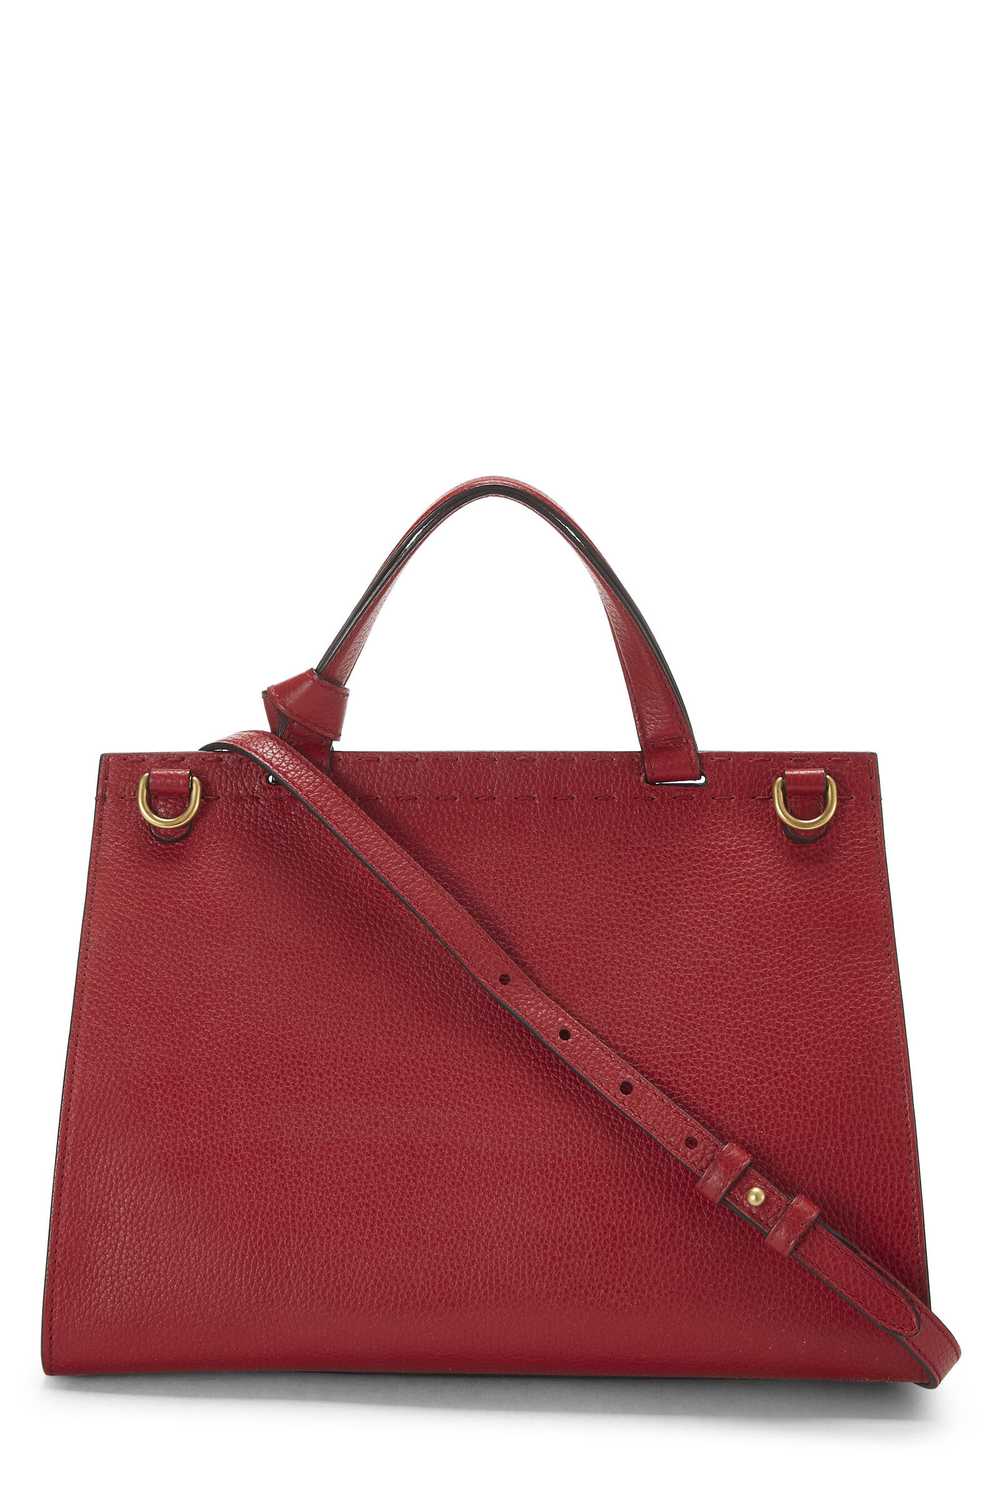 Red Leather GG Marmont Top Handle Flap Bag Small - image 4